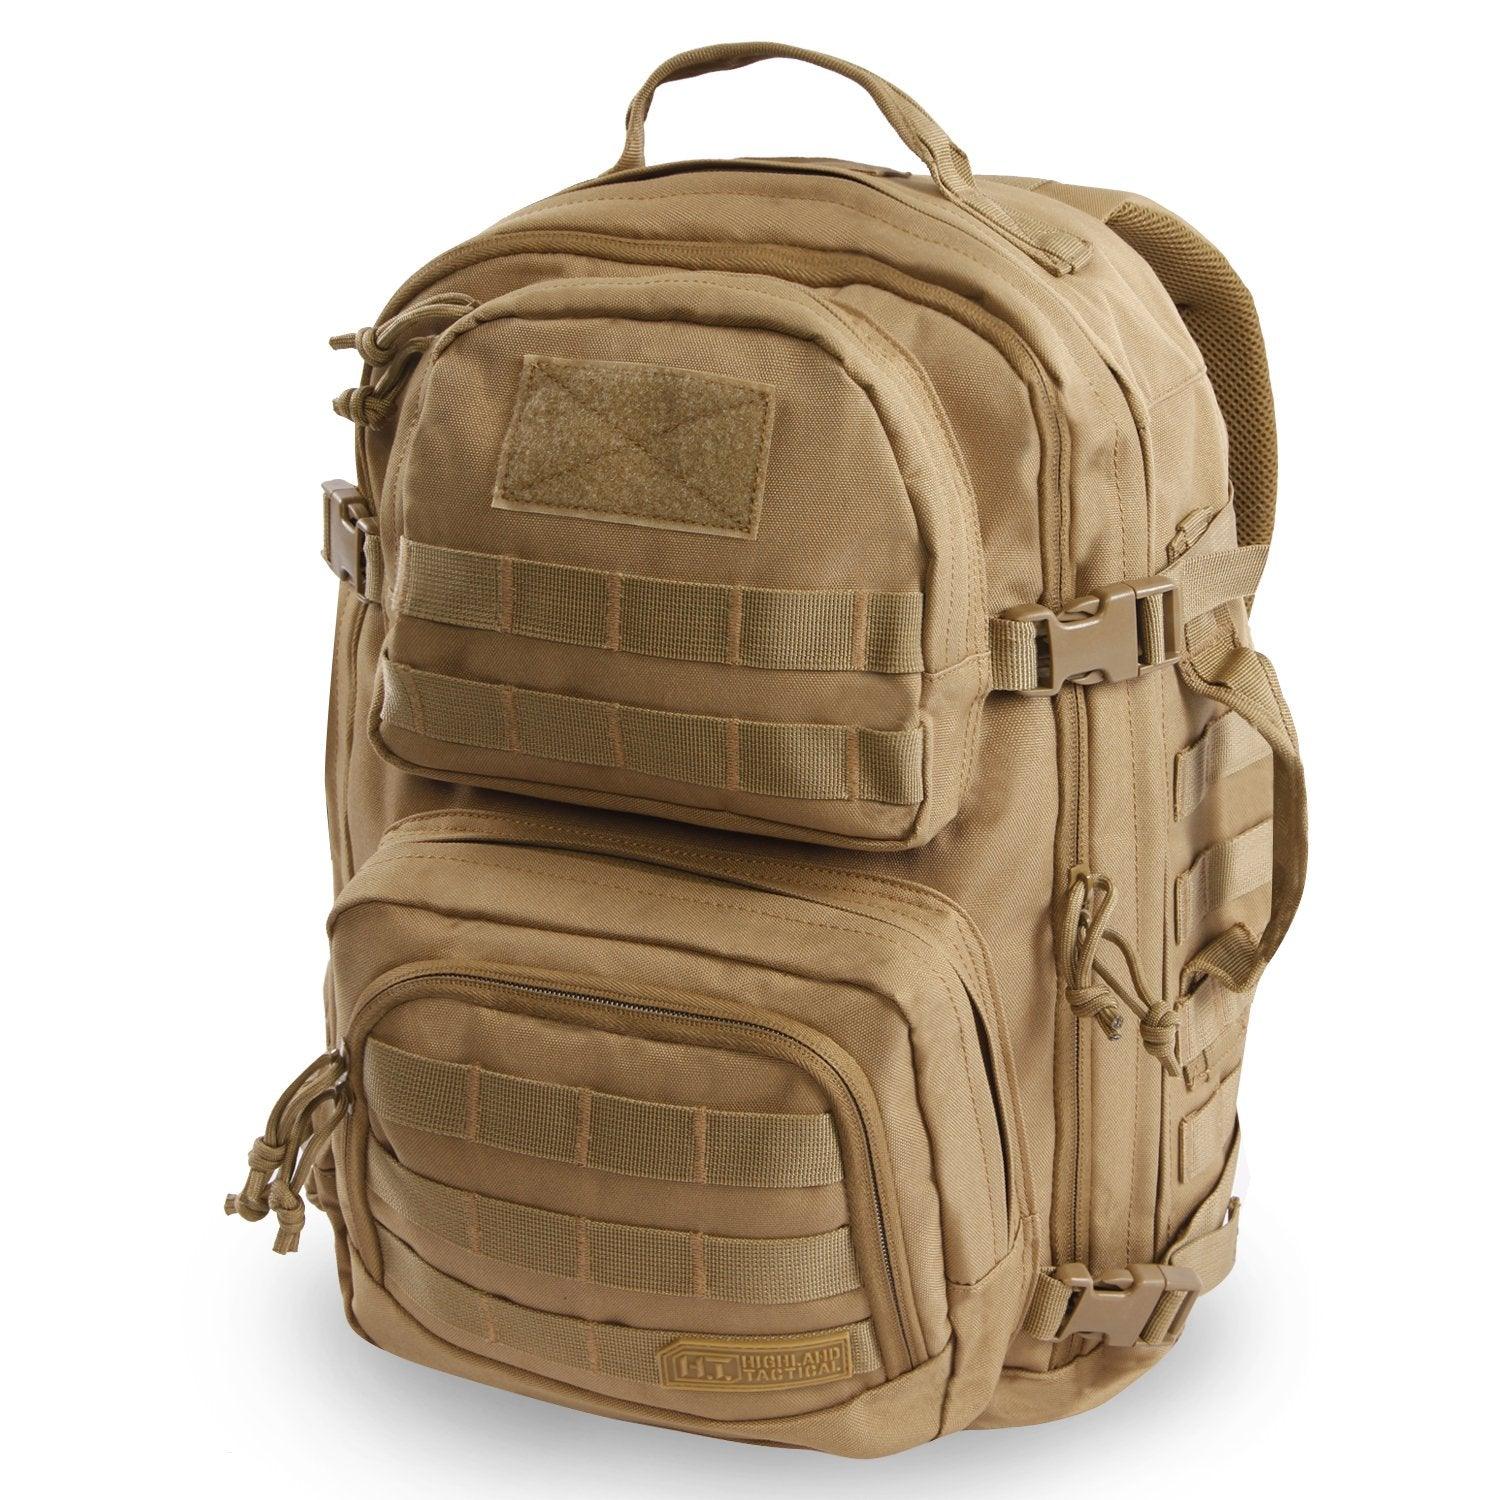 Major Tactical Backpack, Outdoor Pack, MOLLE Bag